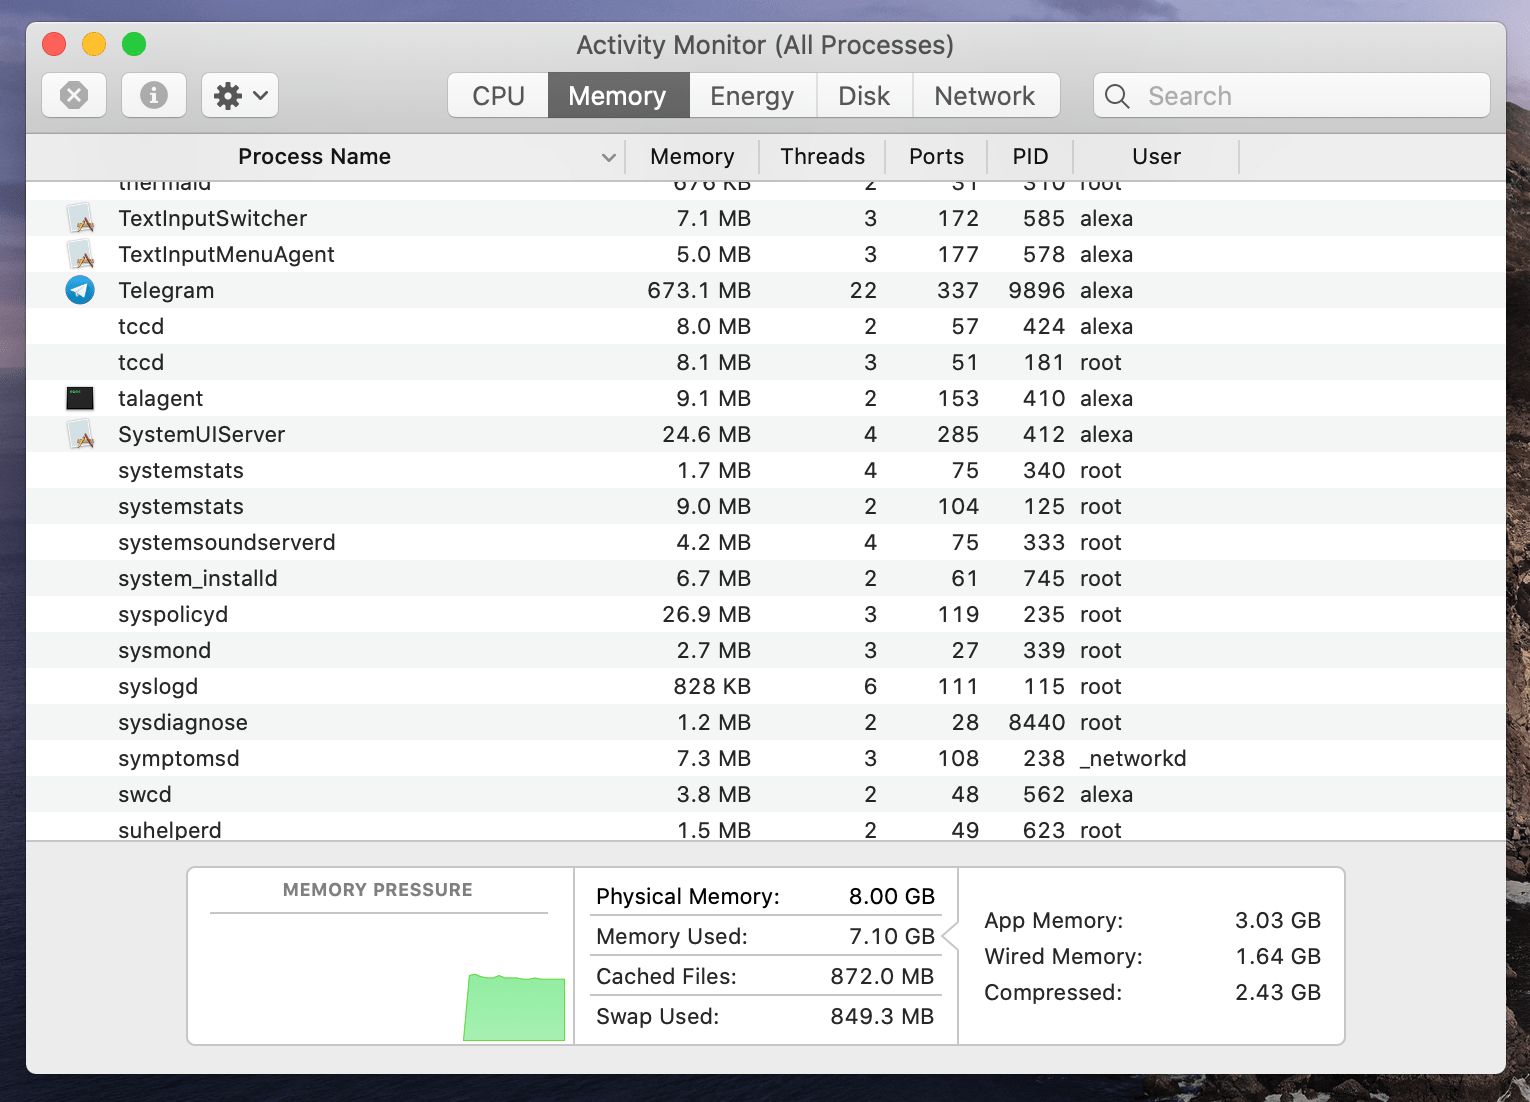 Memory consuption panel in Activity Monitor